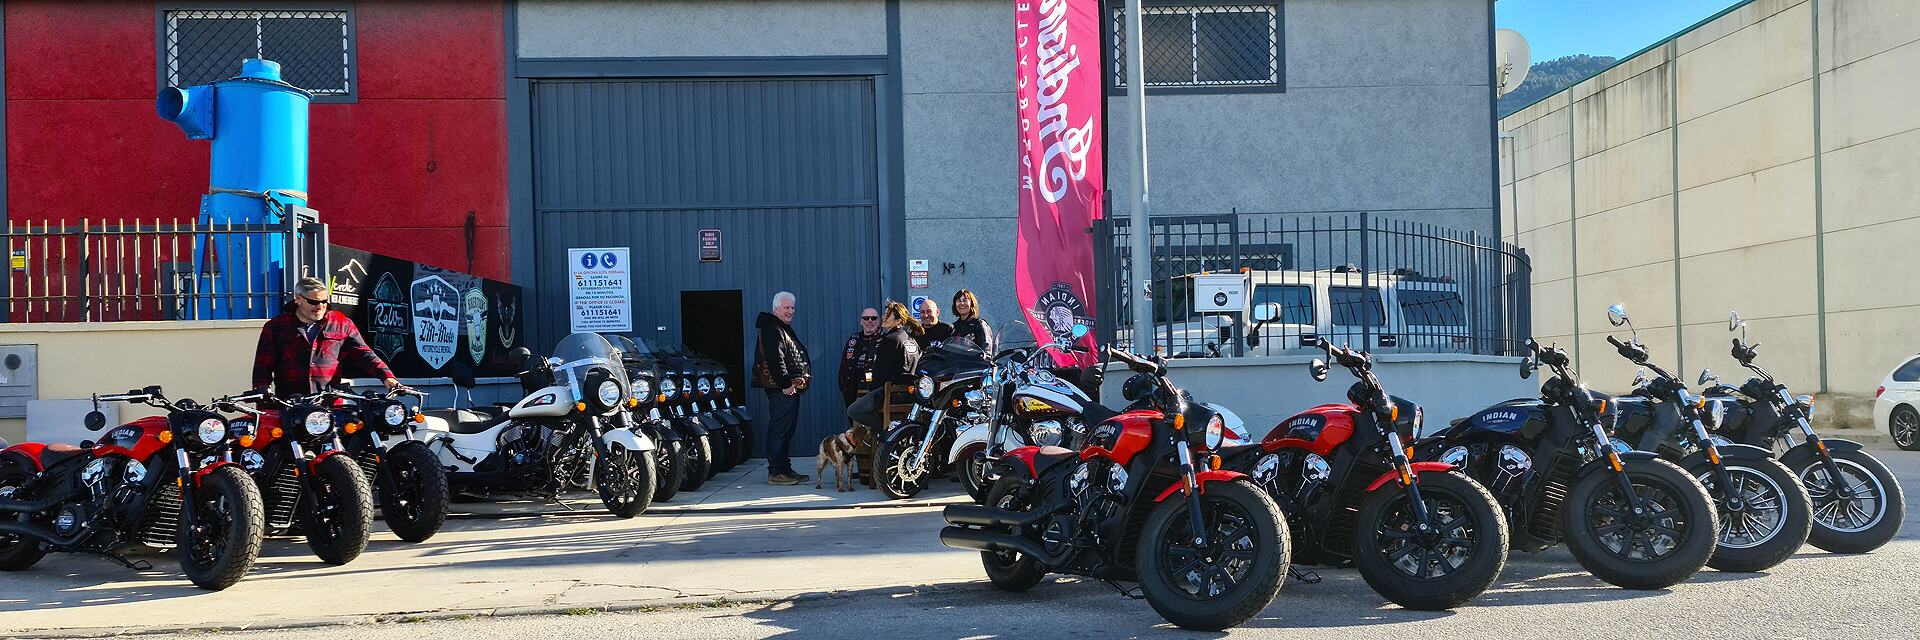 We ensure your perfect motorcycle experience